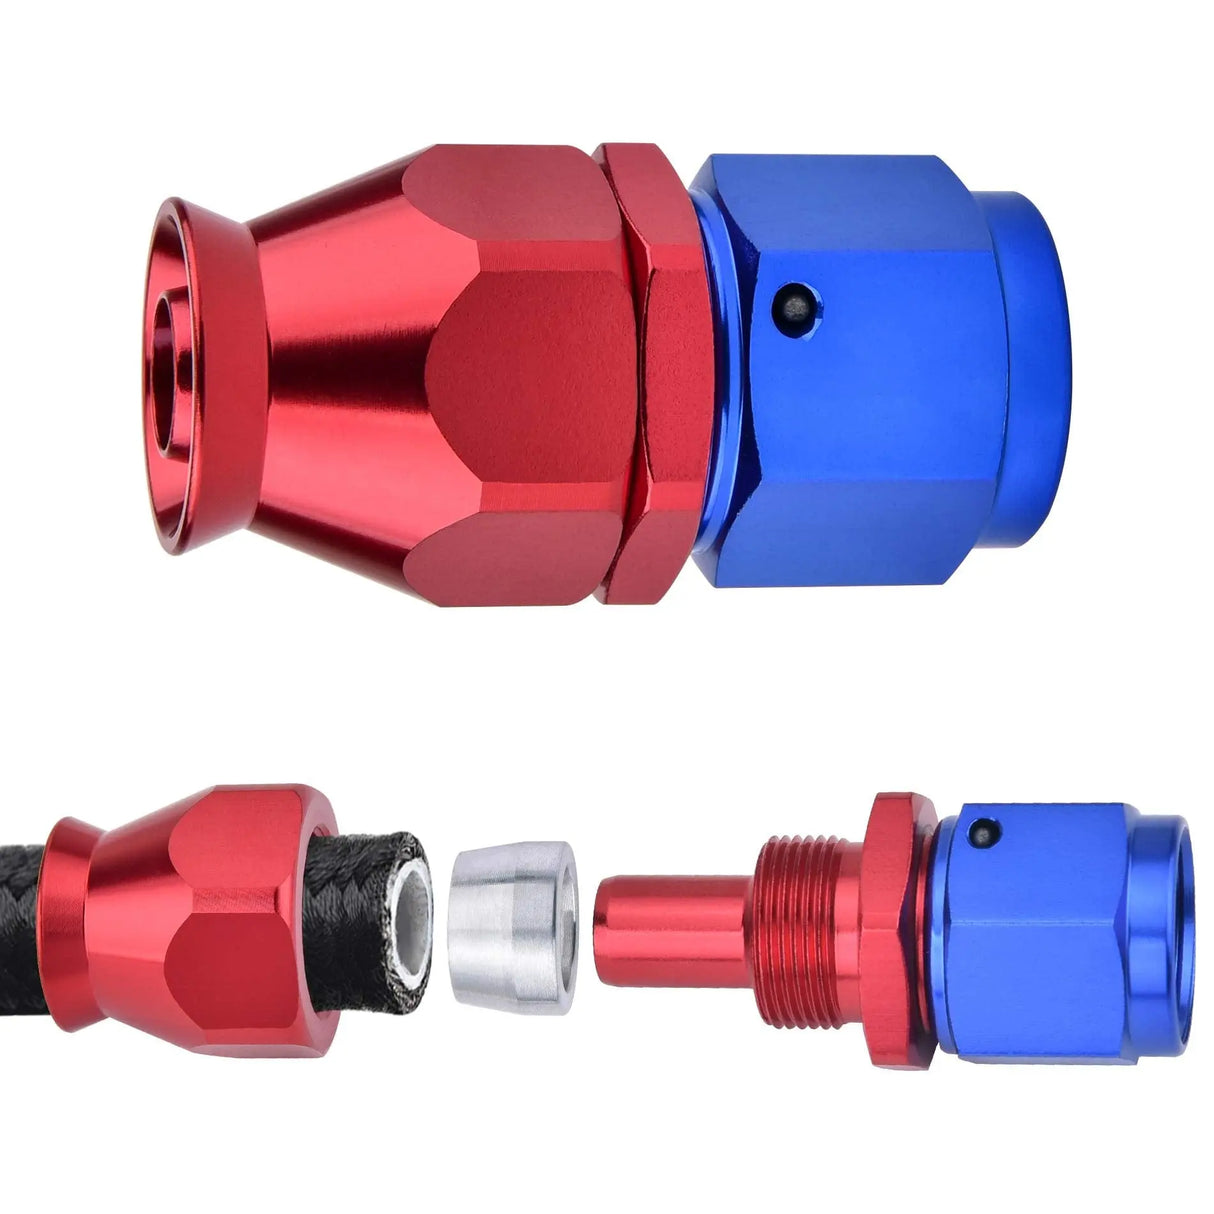 Evilenergy EVIL ENERGY 6AN Straight PTFE Hose End Only for PTFE E85 Fuel Line Fitting Adapter Blue&Red 2 PCS